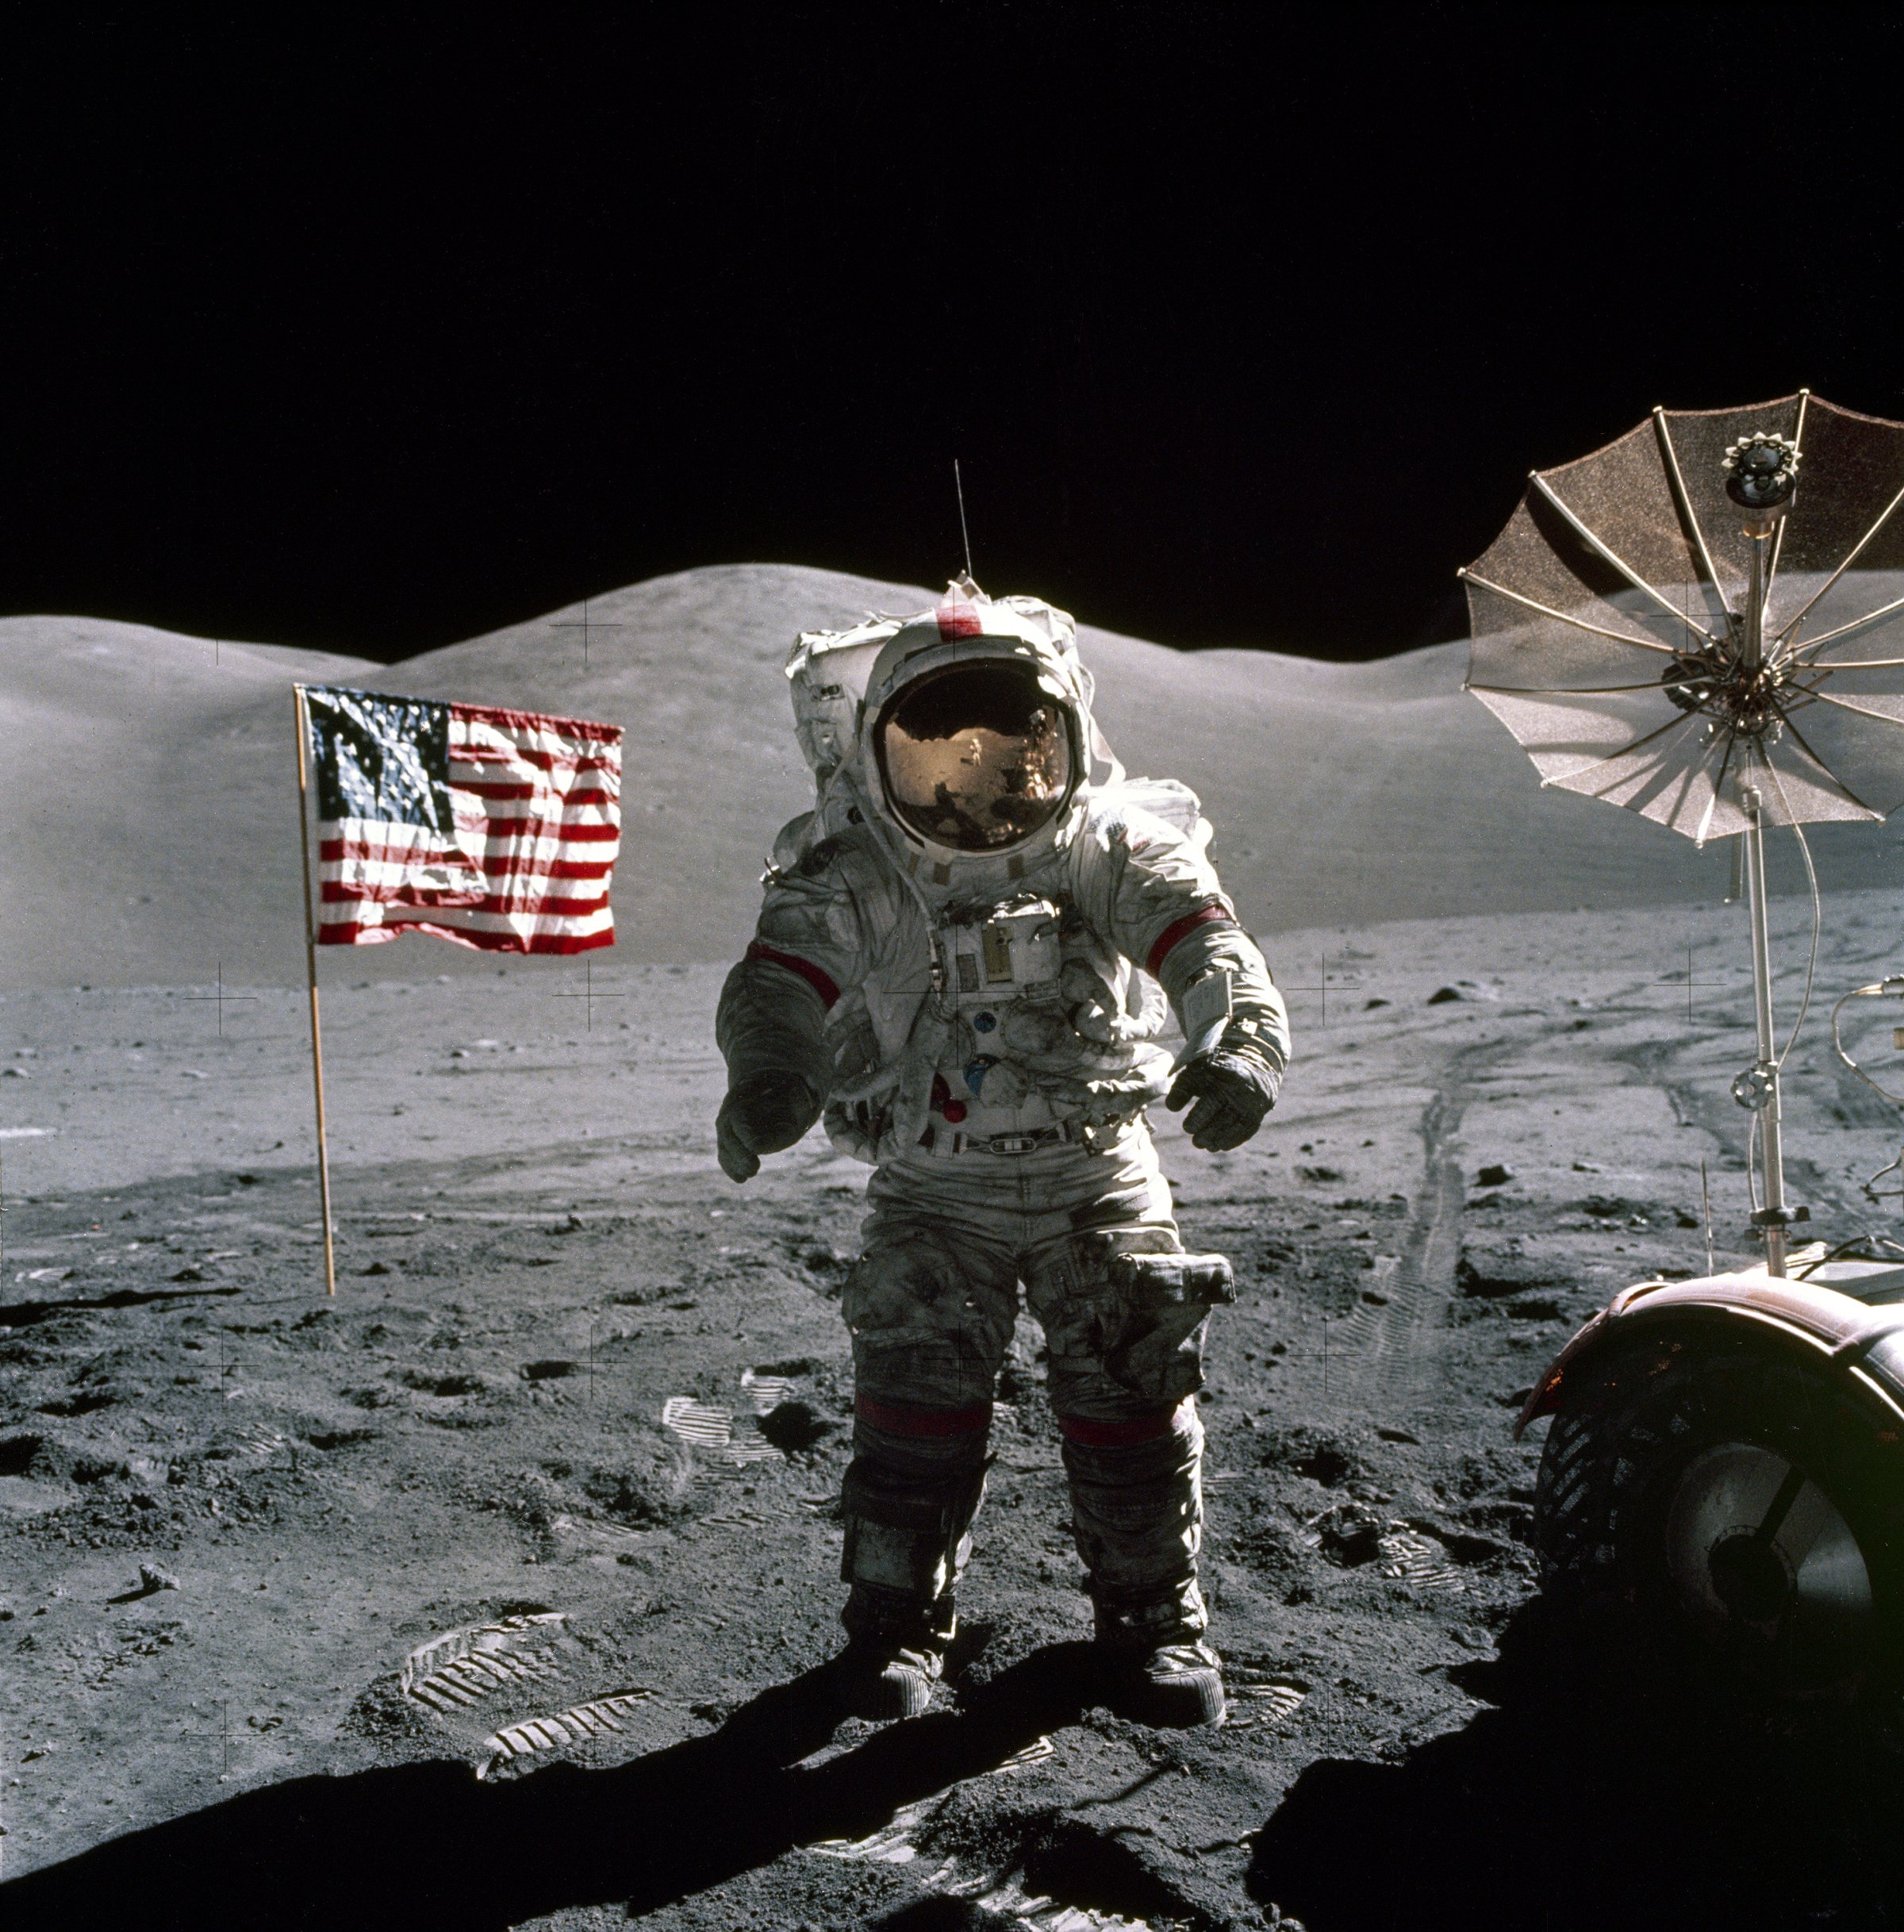 This is an Apollo 17 Astronaut standing upon the lunar surface with the United States flag in the background